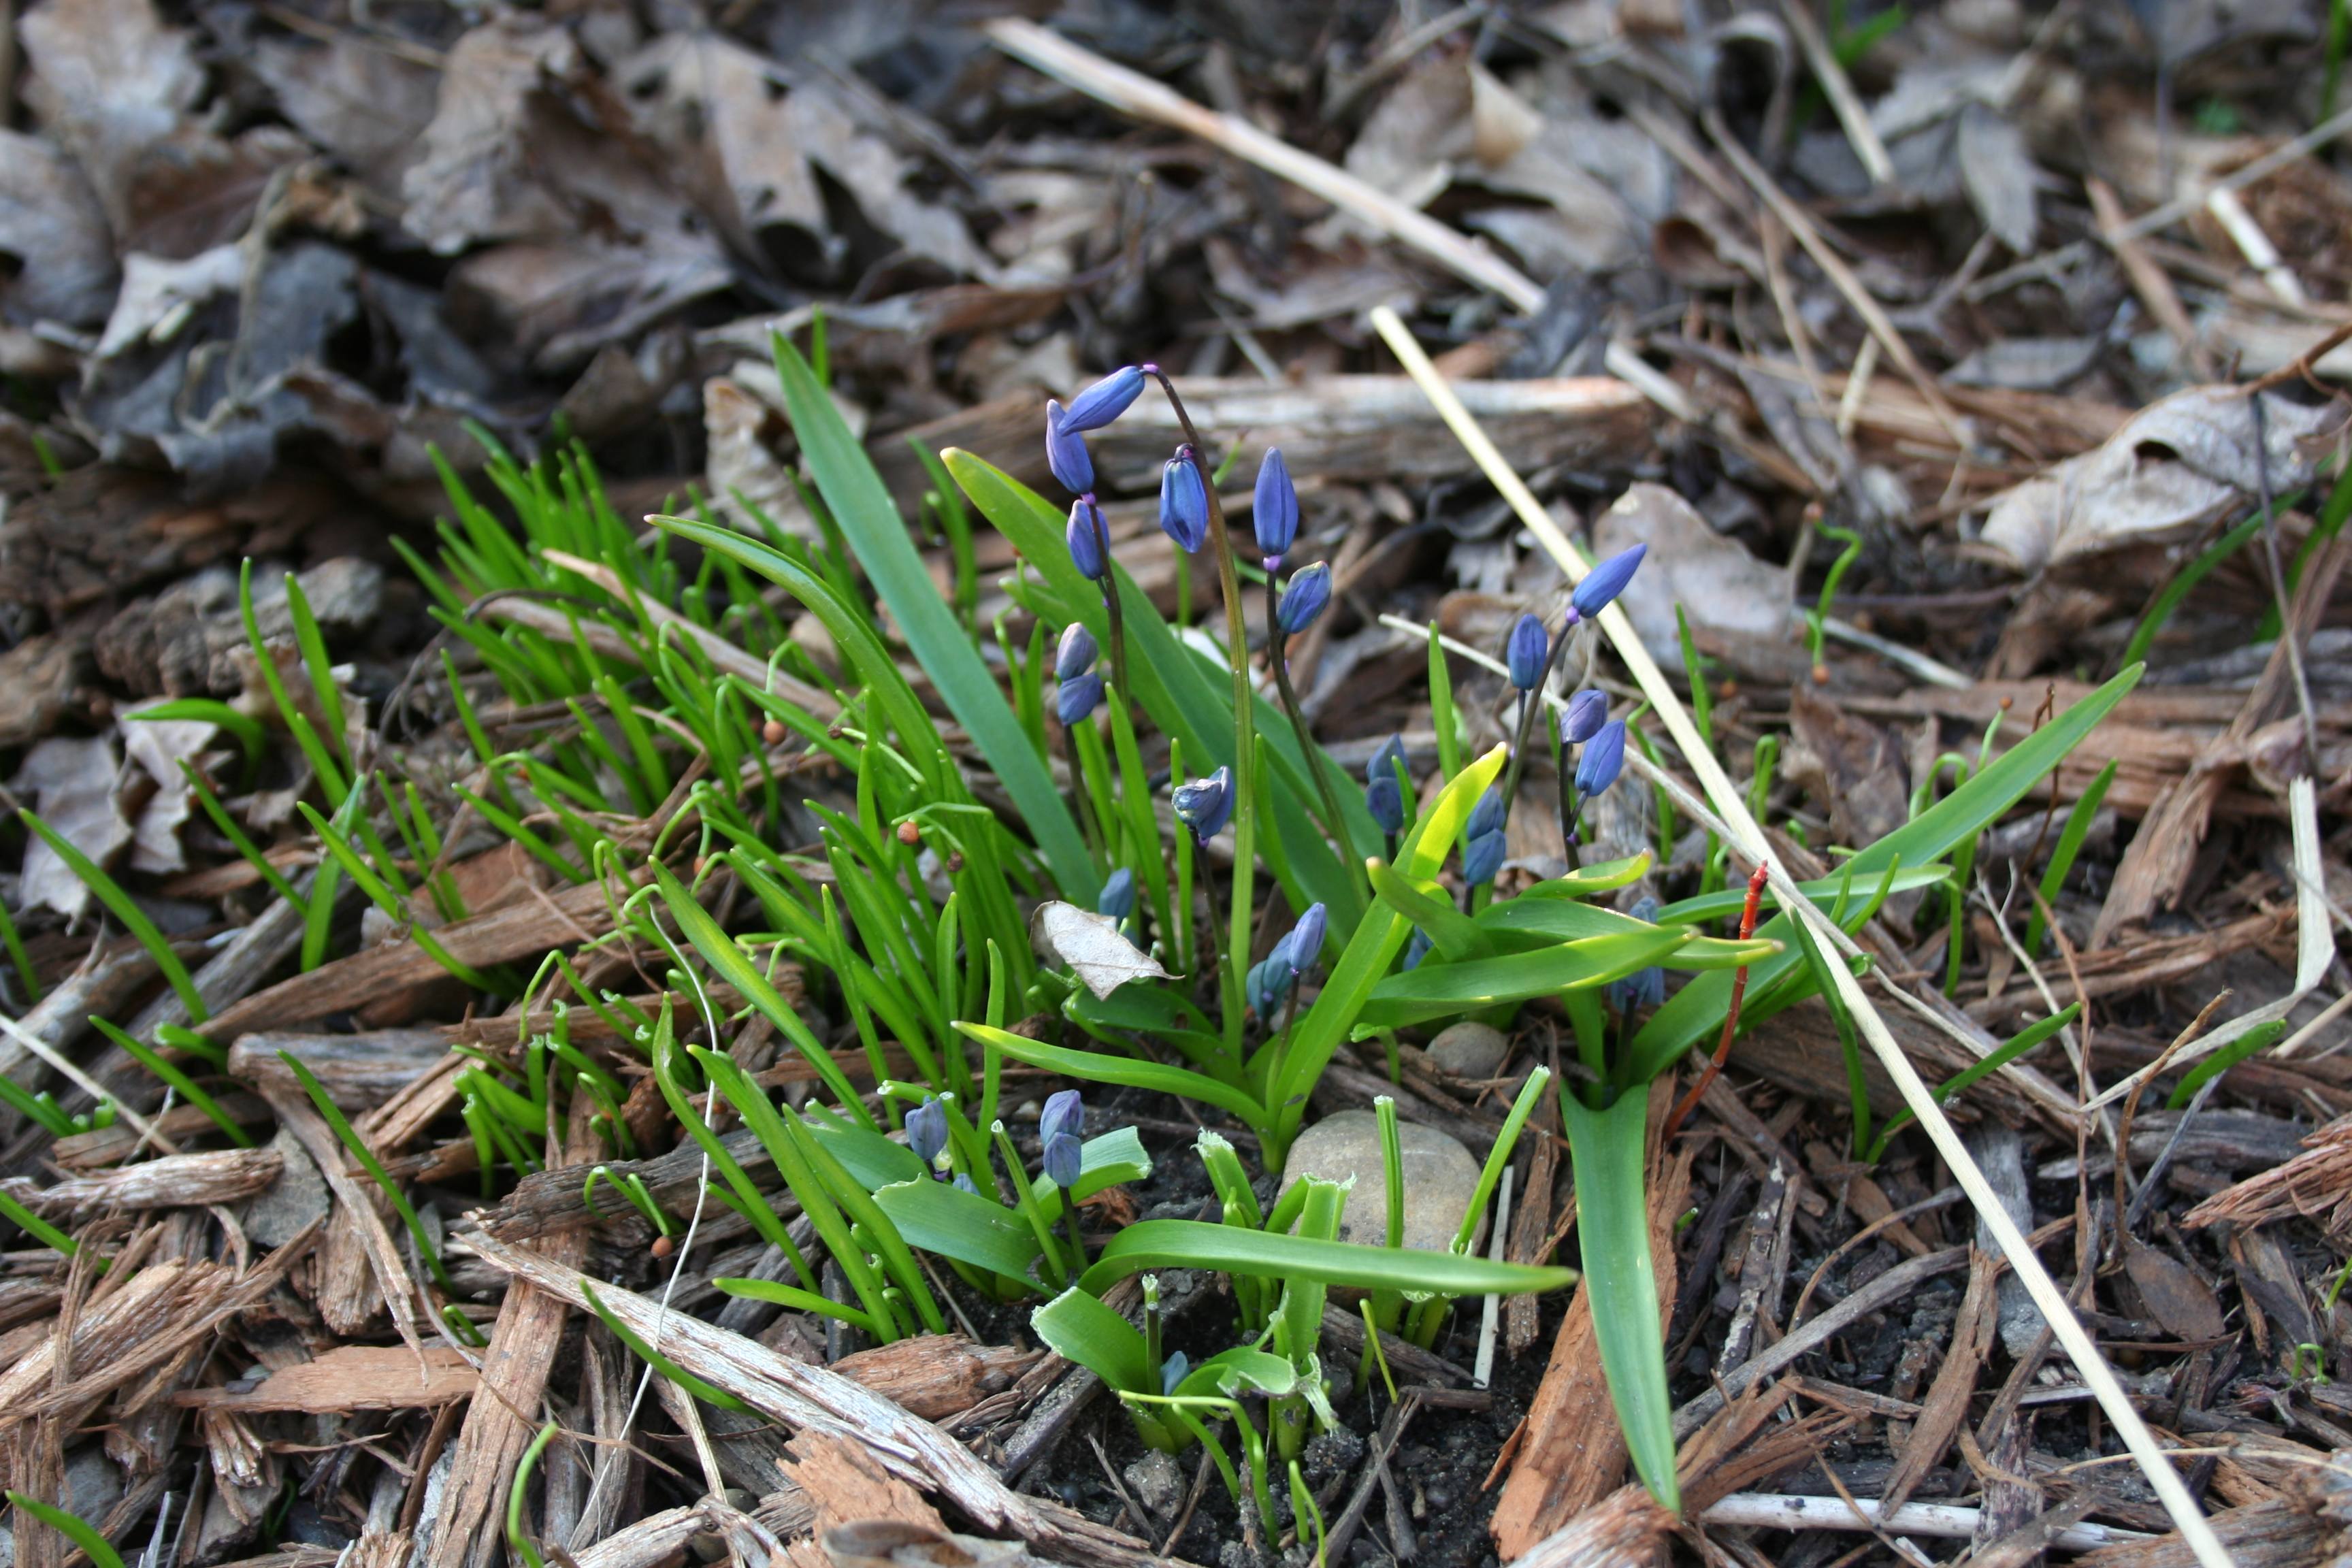 Siberian squill ready to bloom